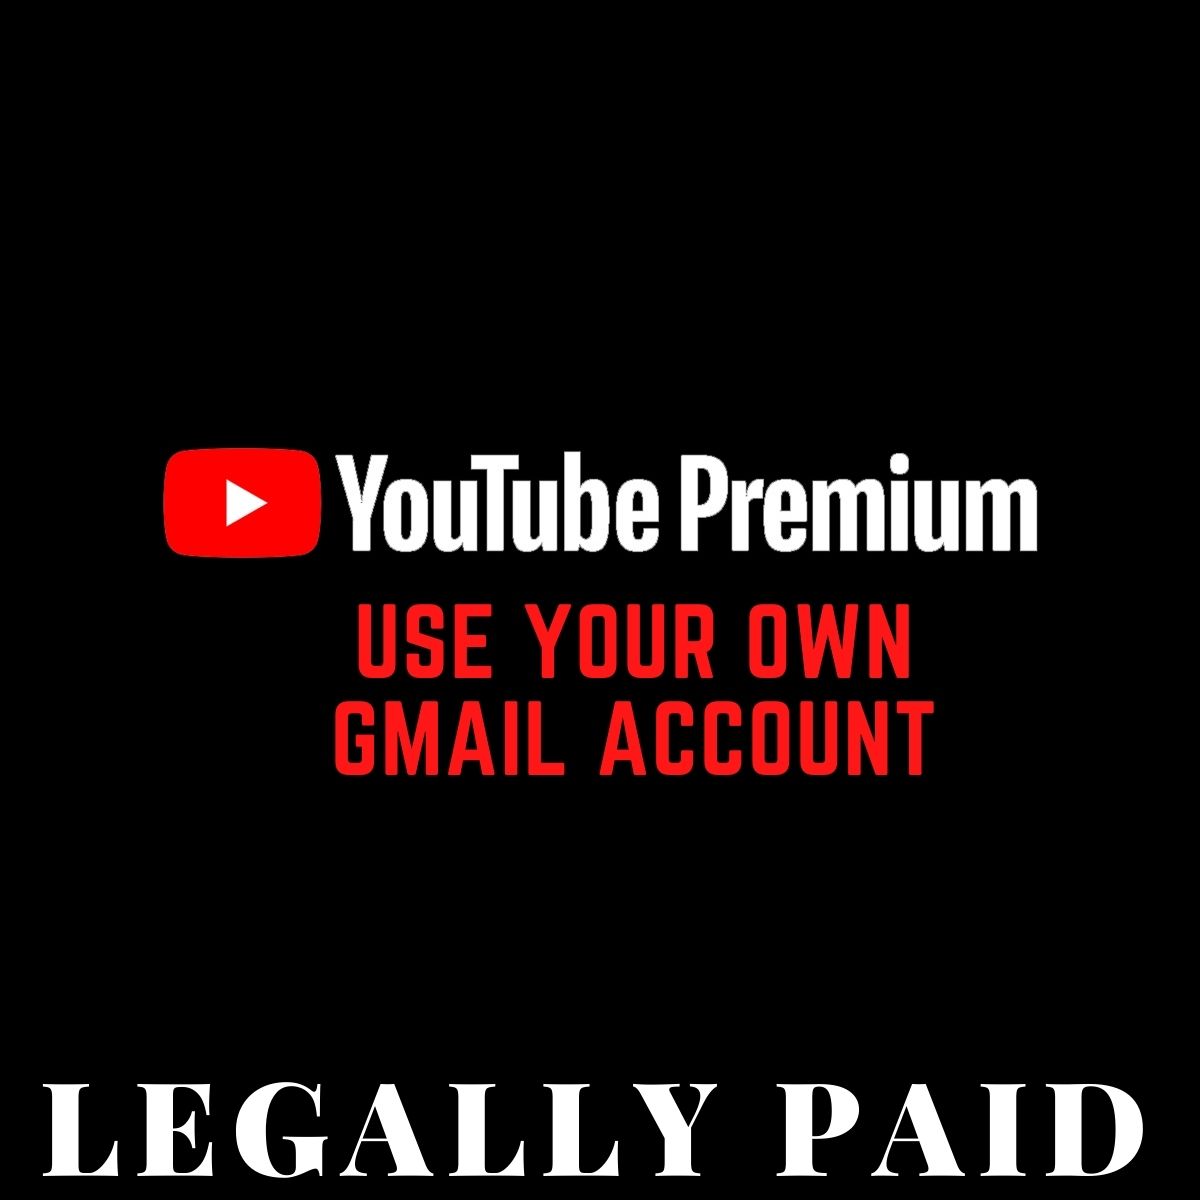 YOUTUBE PREMIUM UPGRADE 1 MONTH (LEGALLY PAID)